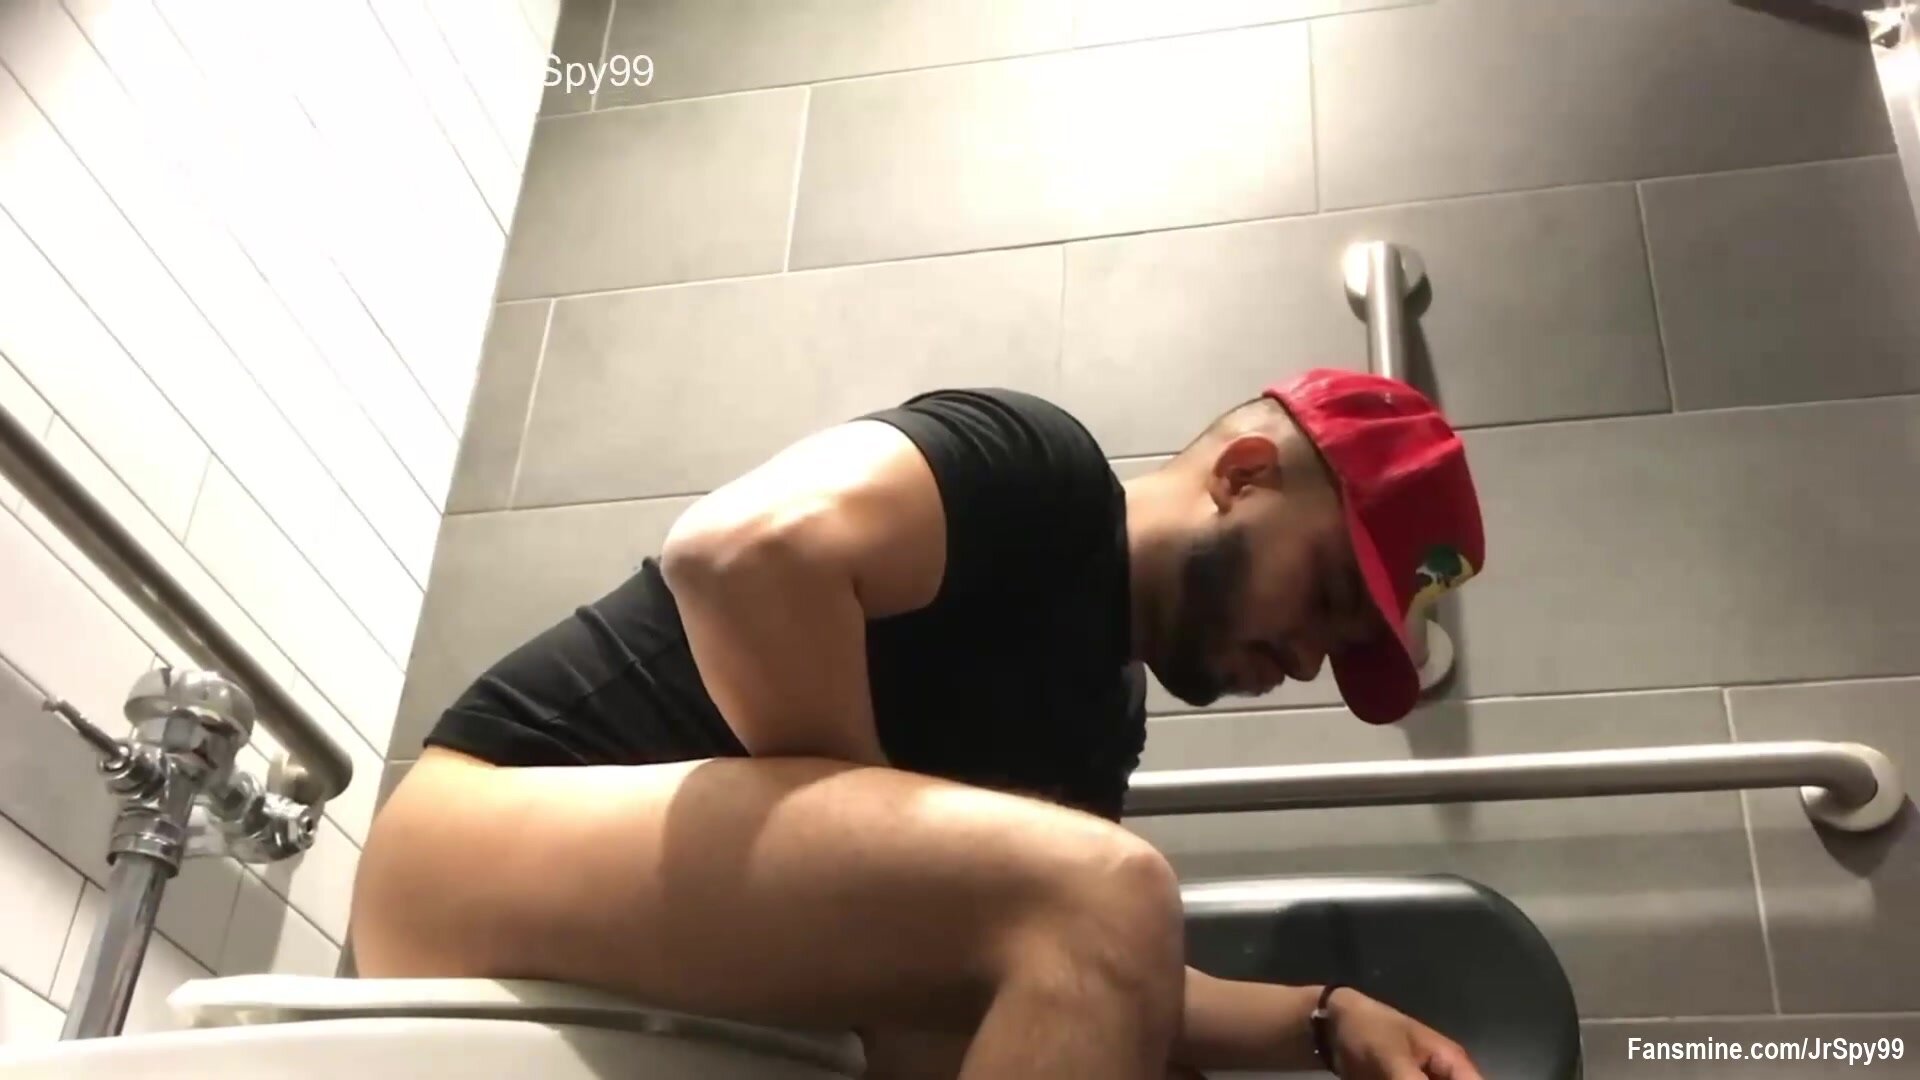 Spy Hot guy on the toilet with wipe